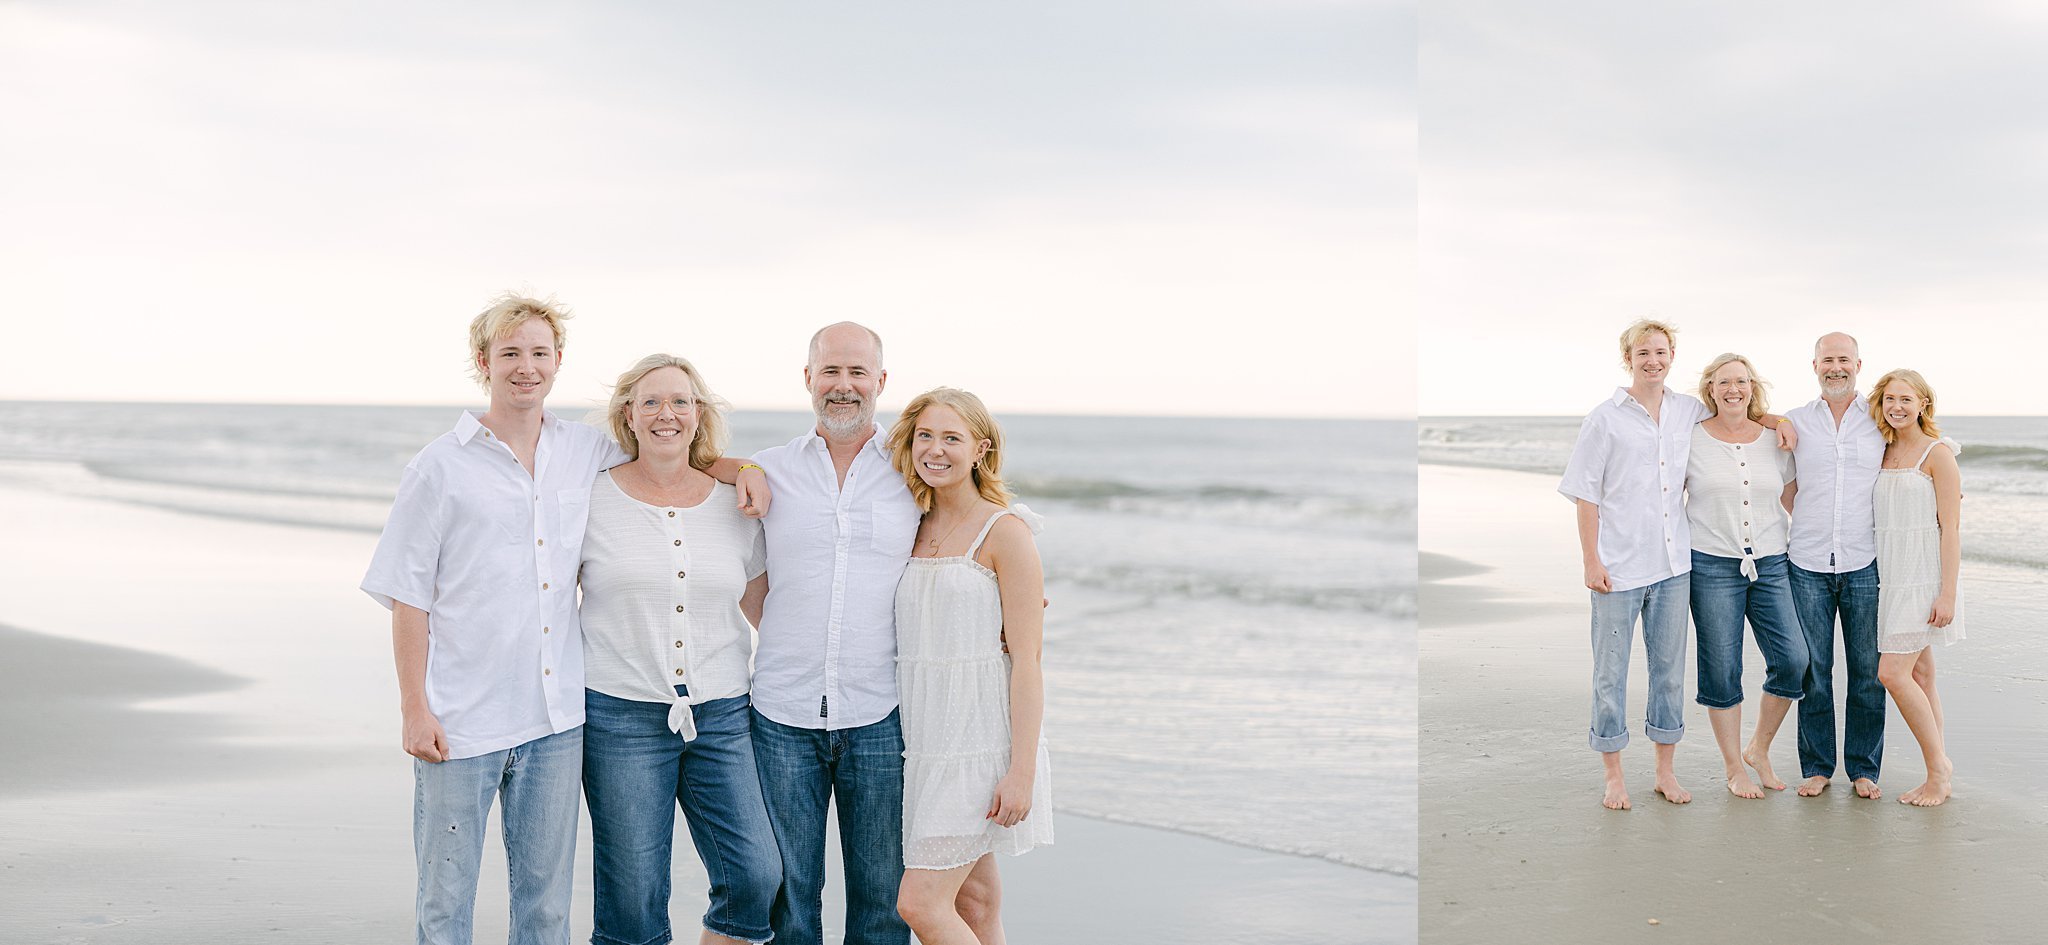 Katherine_Ives_Photography_Albrecht_Extended_Family_HHI_550.JPG